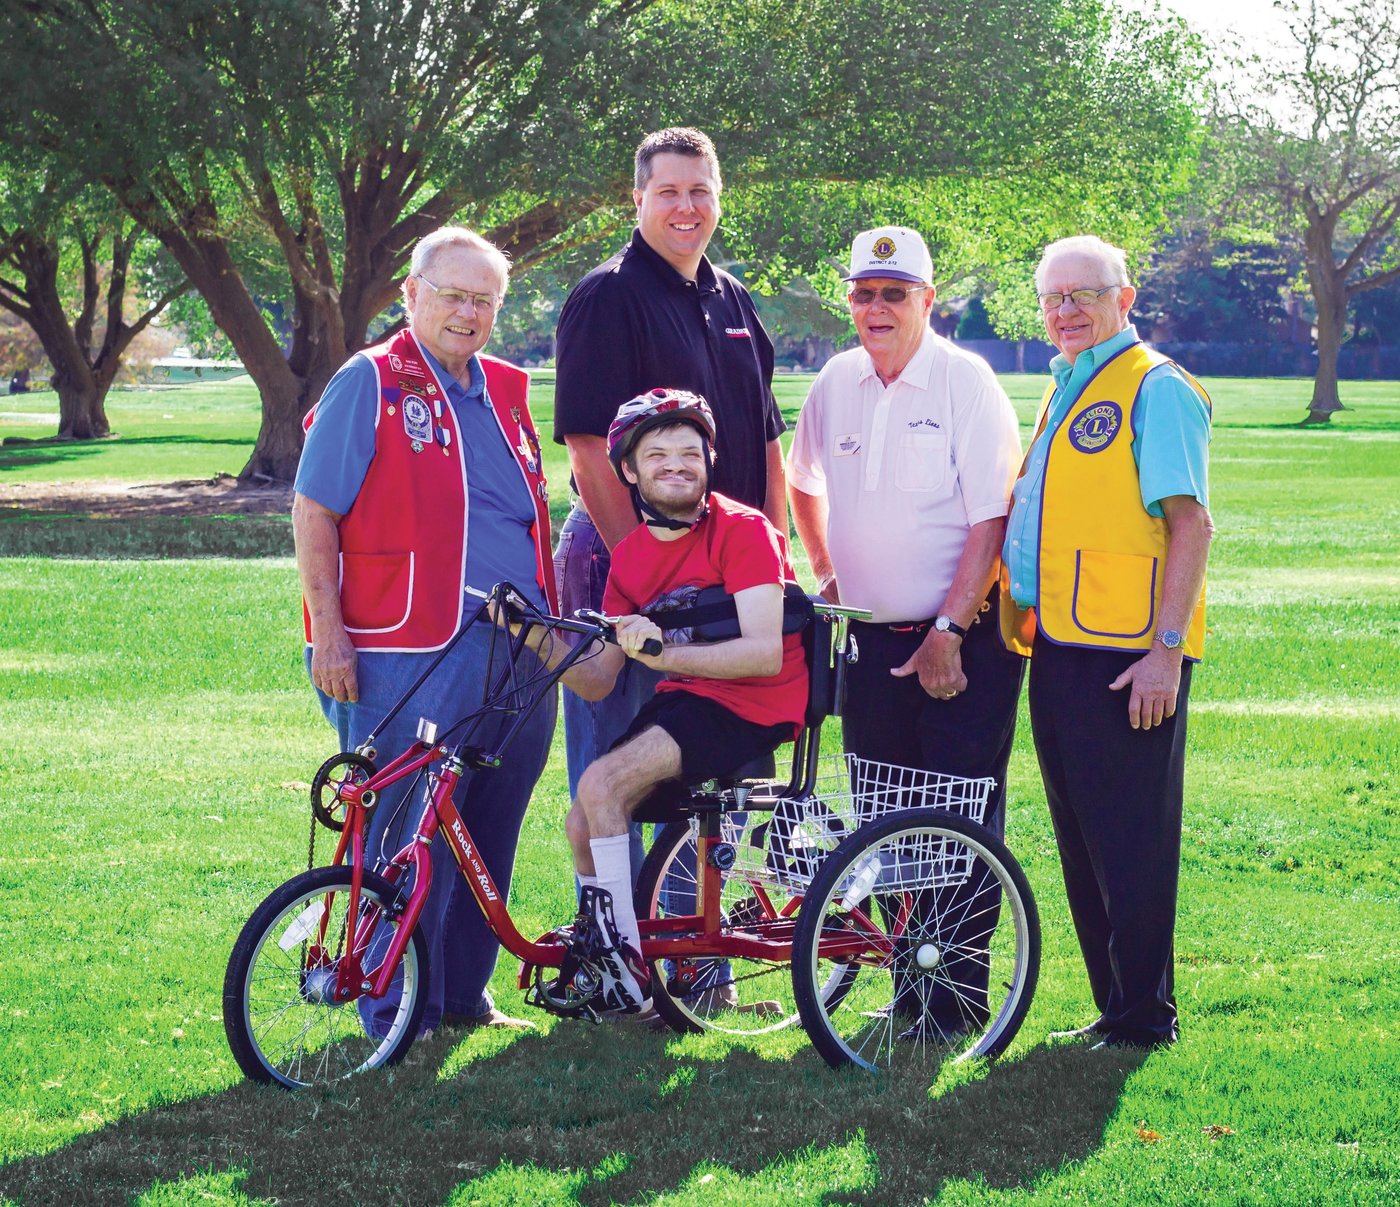 Cycle For Life recipient Jerrod Meyers poses with Dan Pope, President of the Redbud Lions Club, which is the National Sponsor of the Cycle for Life Project, Bryan Steward, Manager of W. W. Grainger, Lubbock Store which donated funds for several cycles, Marshall Cooper, Past International Director, and Joe Tarver, Cycle for Life coordinator. Photo by Kelsey Hart.